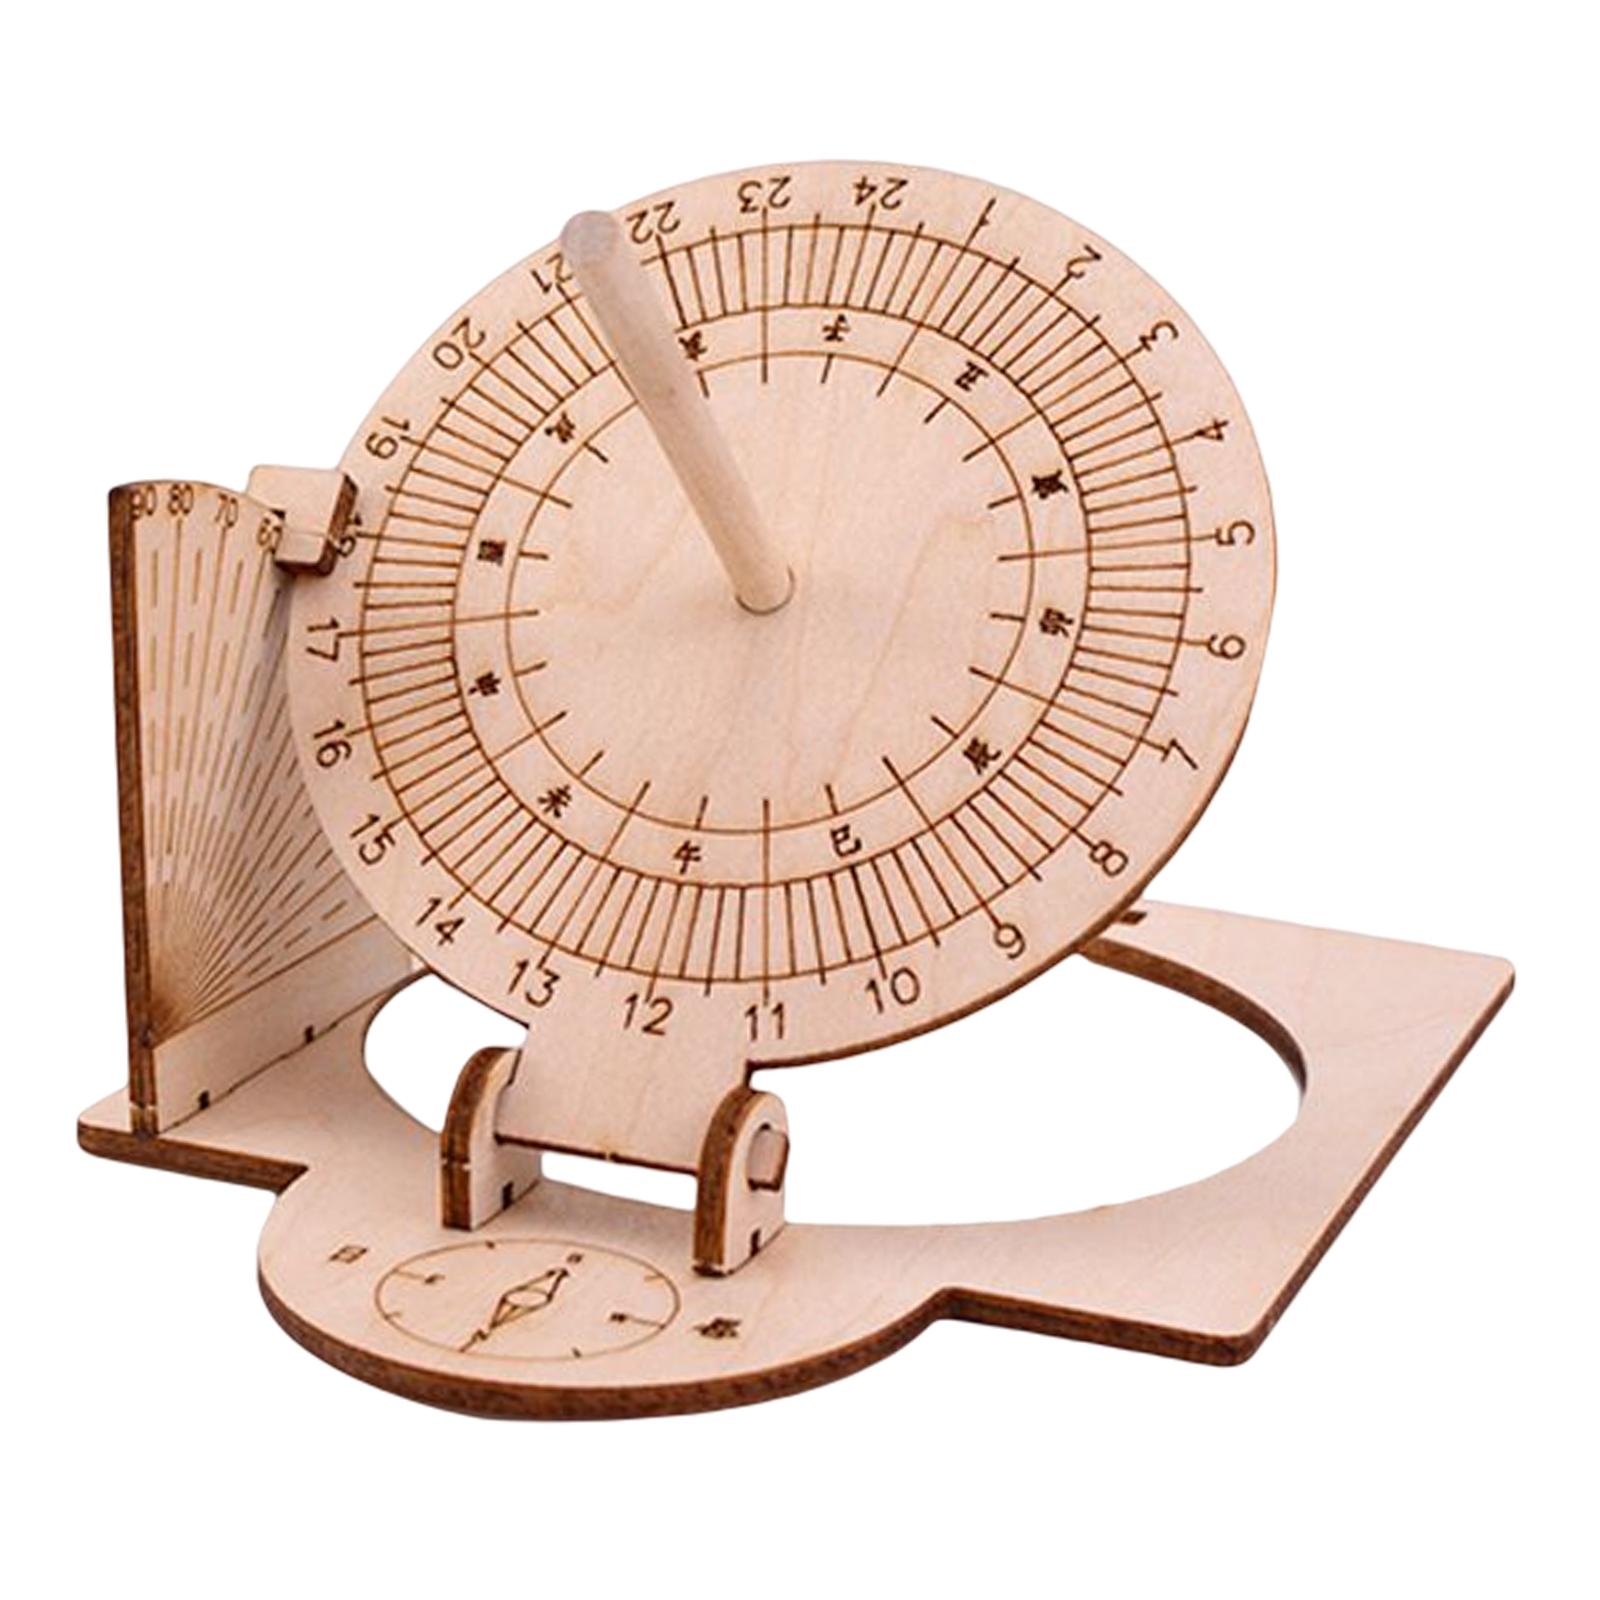 Equatorial Sundial Clock DIY Wooden Building for Adults and Children Experiment Equipment Durable Manual Assembly Model Teaching Aid - image 3 of 6